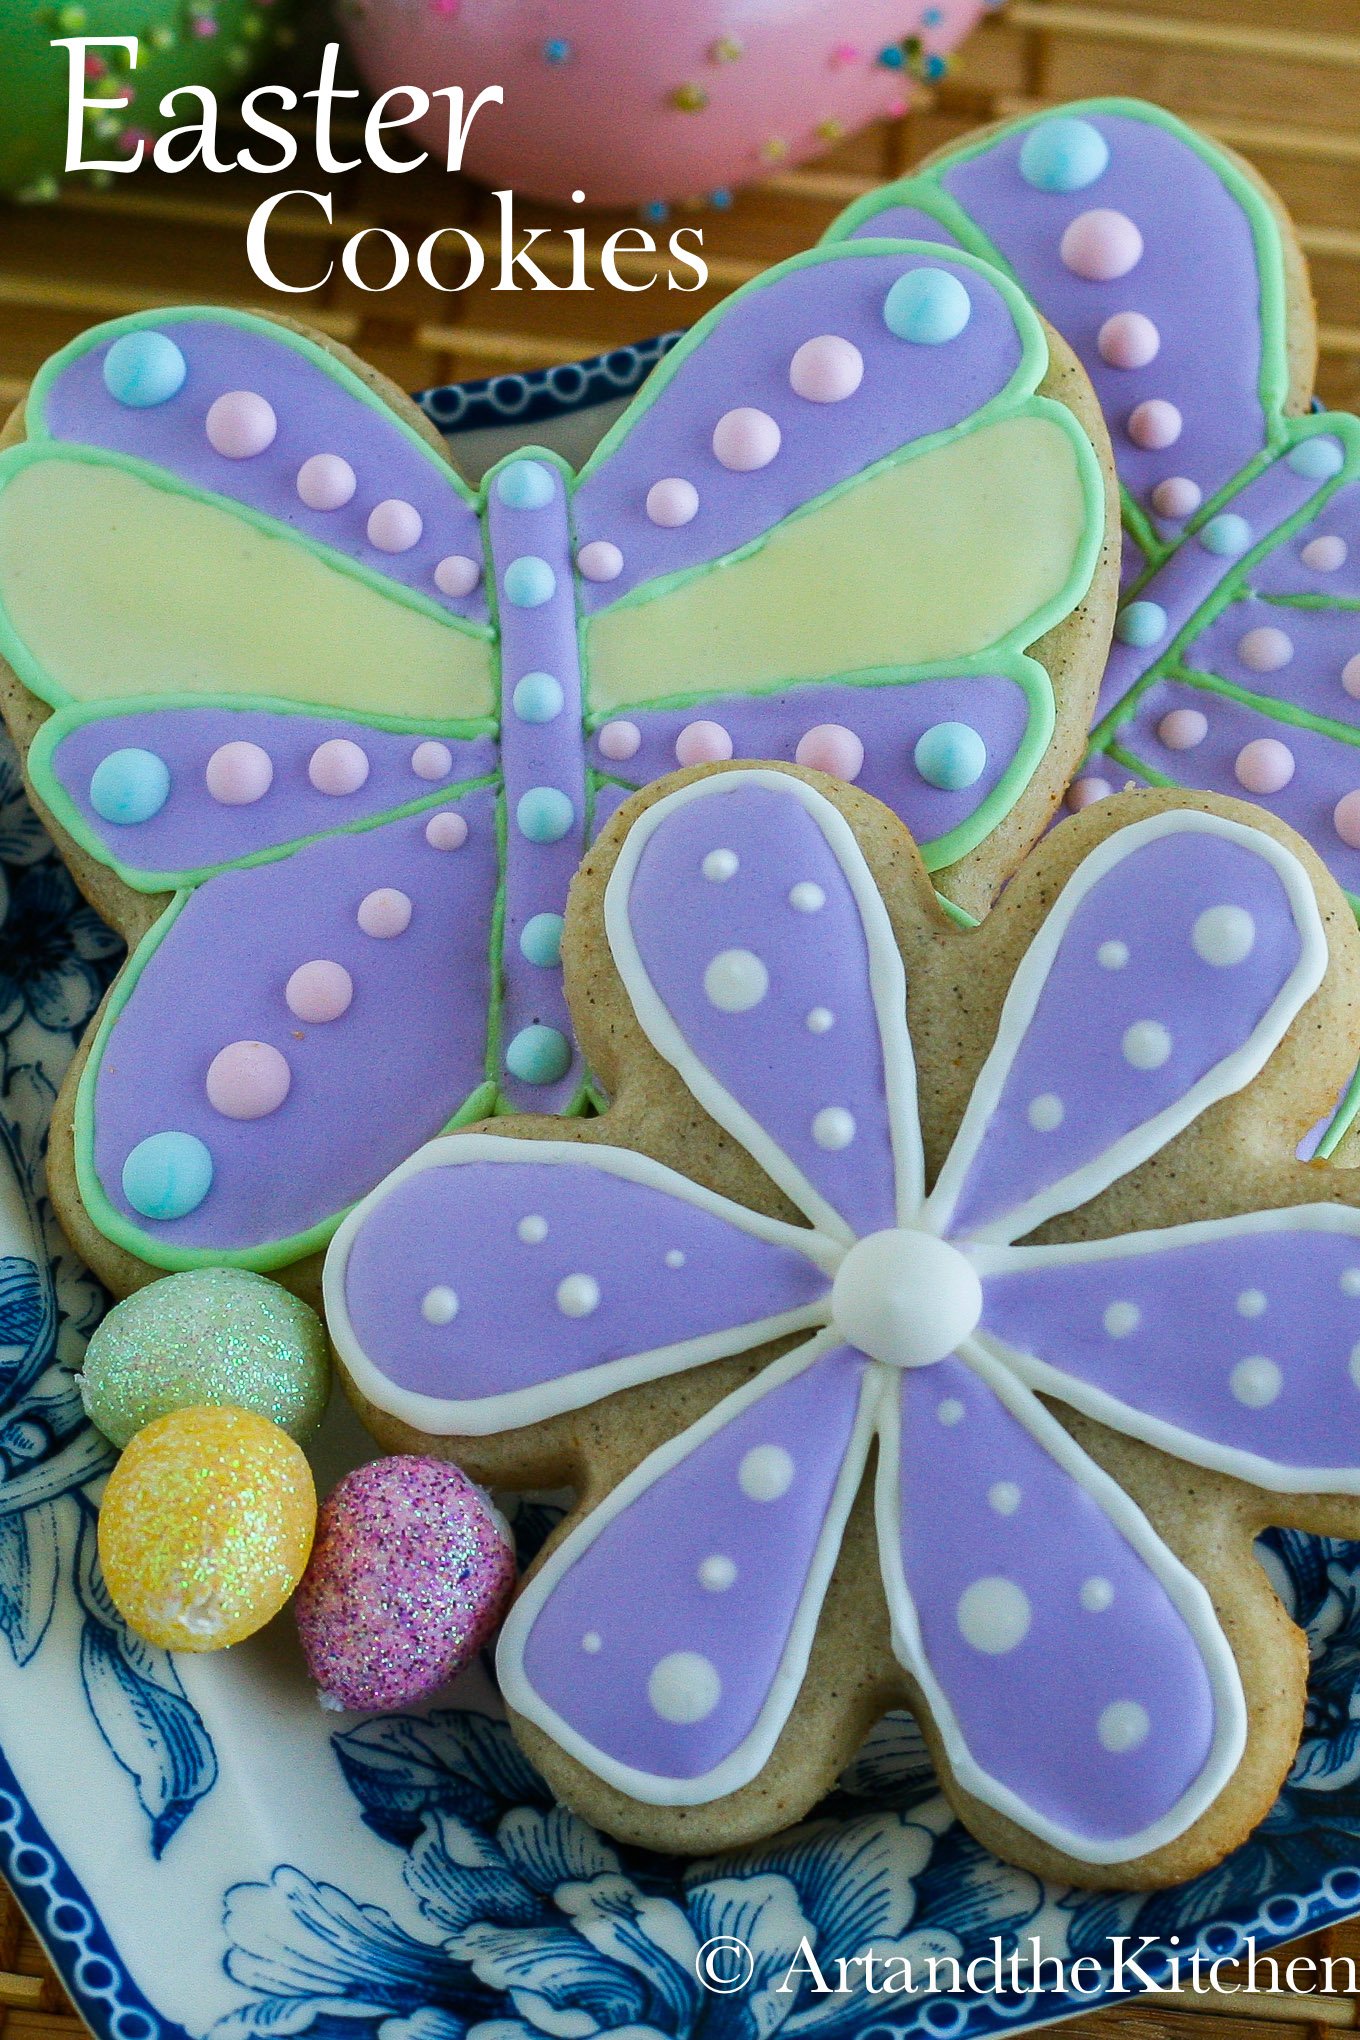 Flower and butterfly shaped sugar cookies decorated with colourful royal icing.